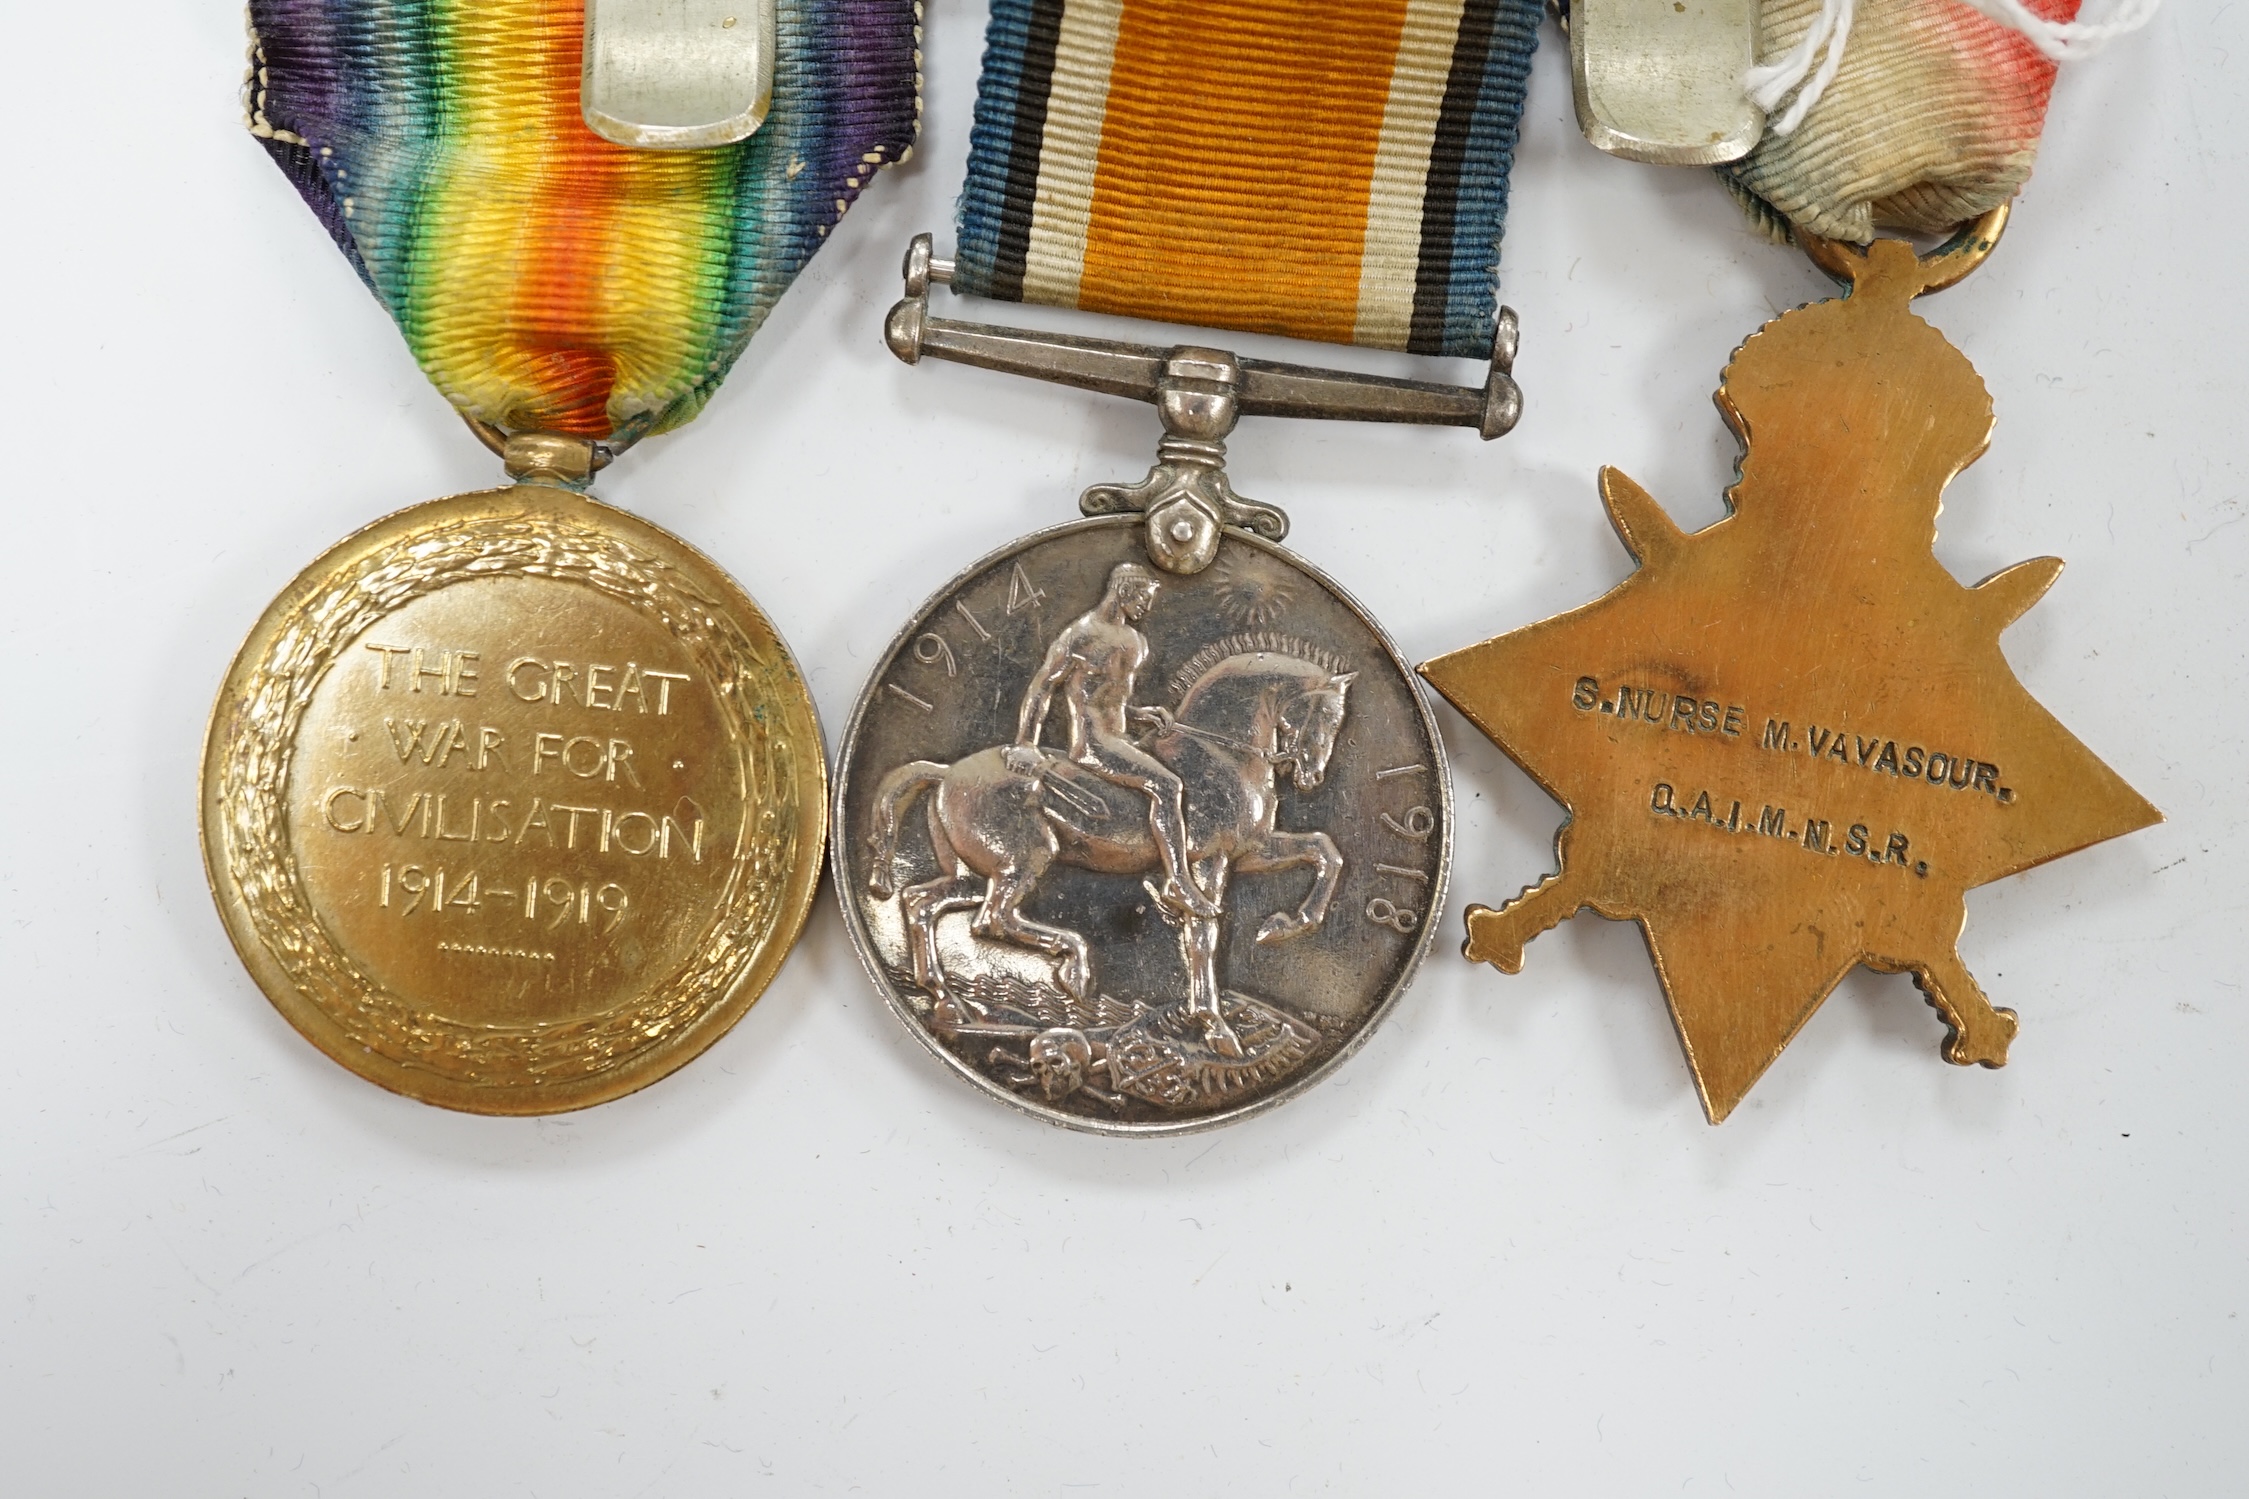 A First World War medal trio awarded to Staff Nurse M. Vavasour, Q.A.I.M.N.S.R. mounted together on a common pin. Condition - fair